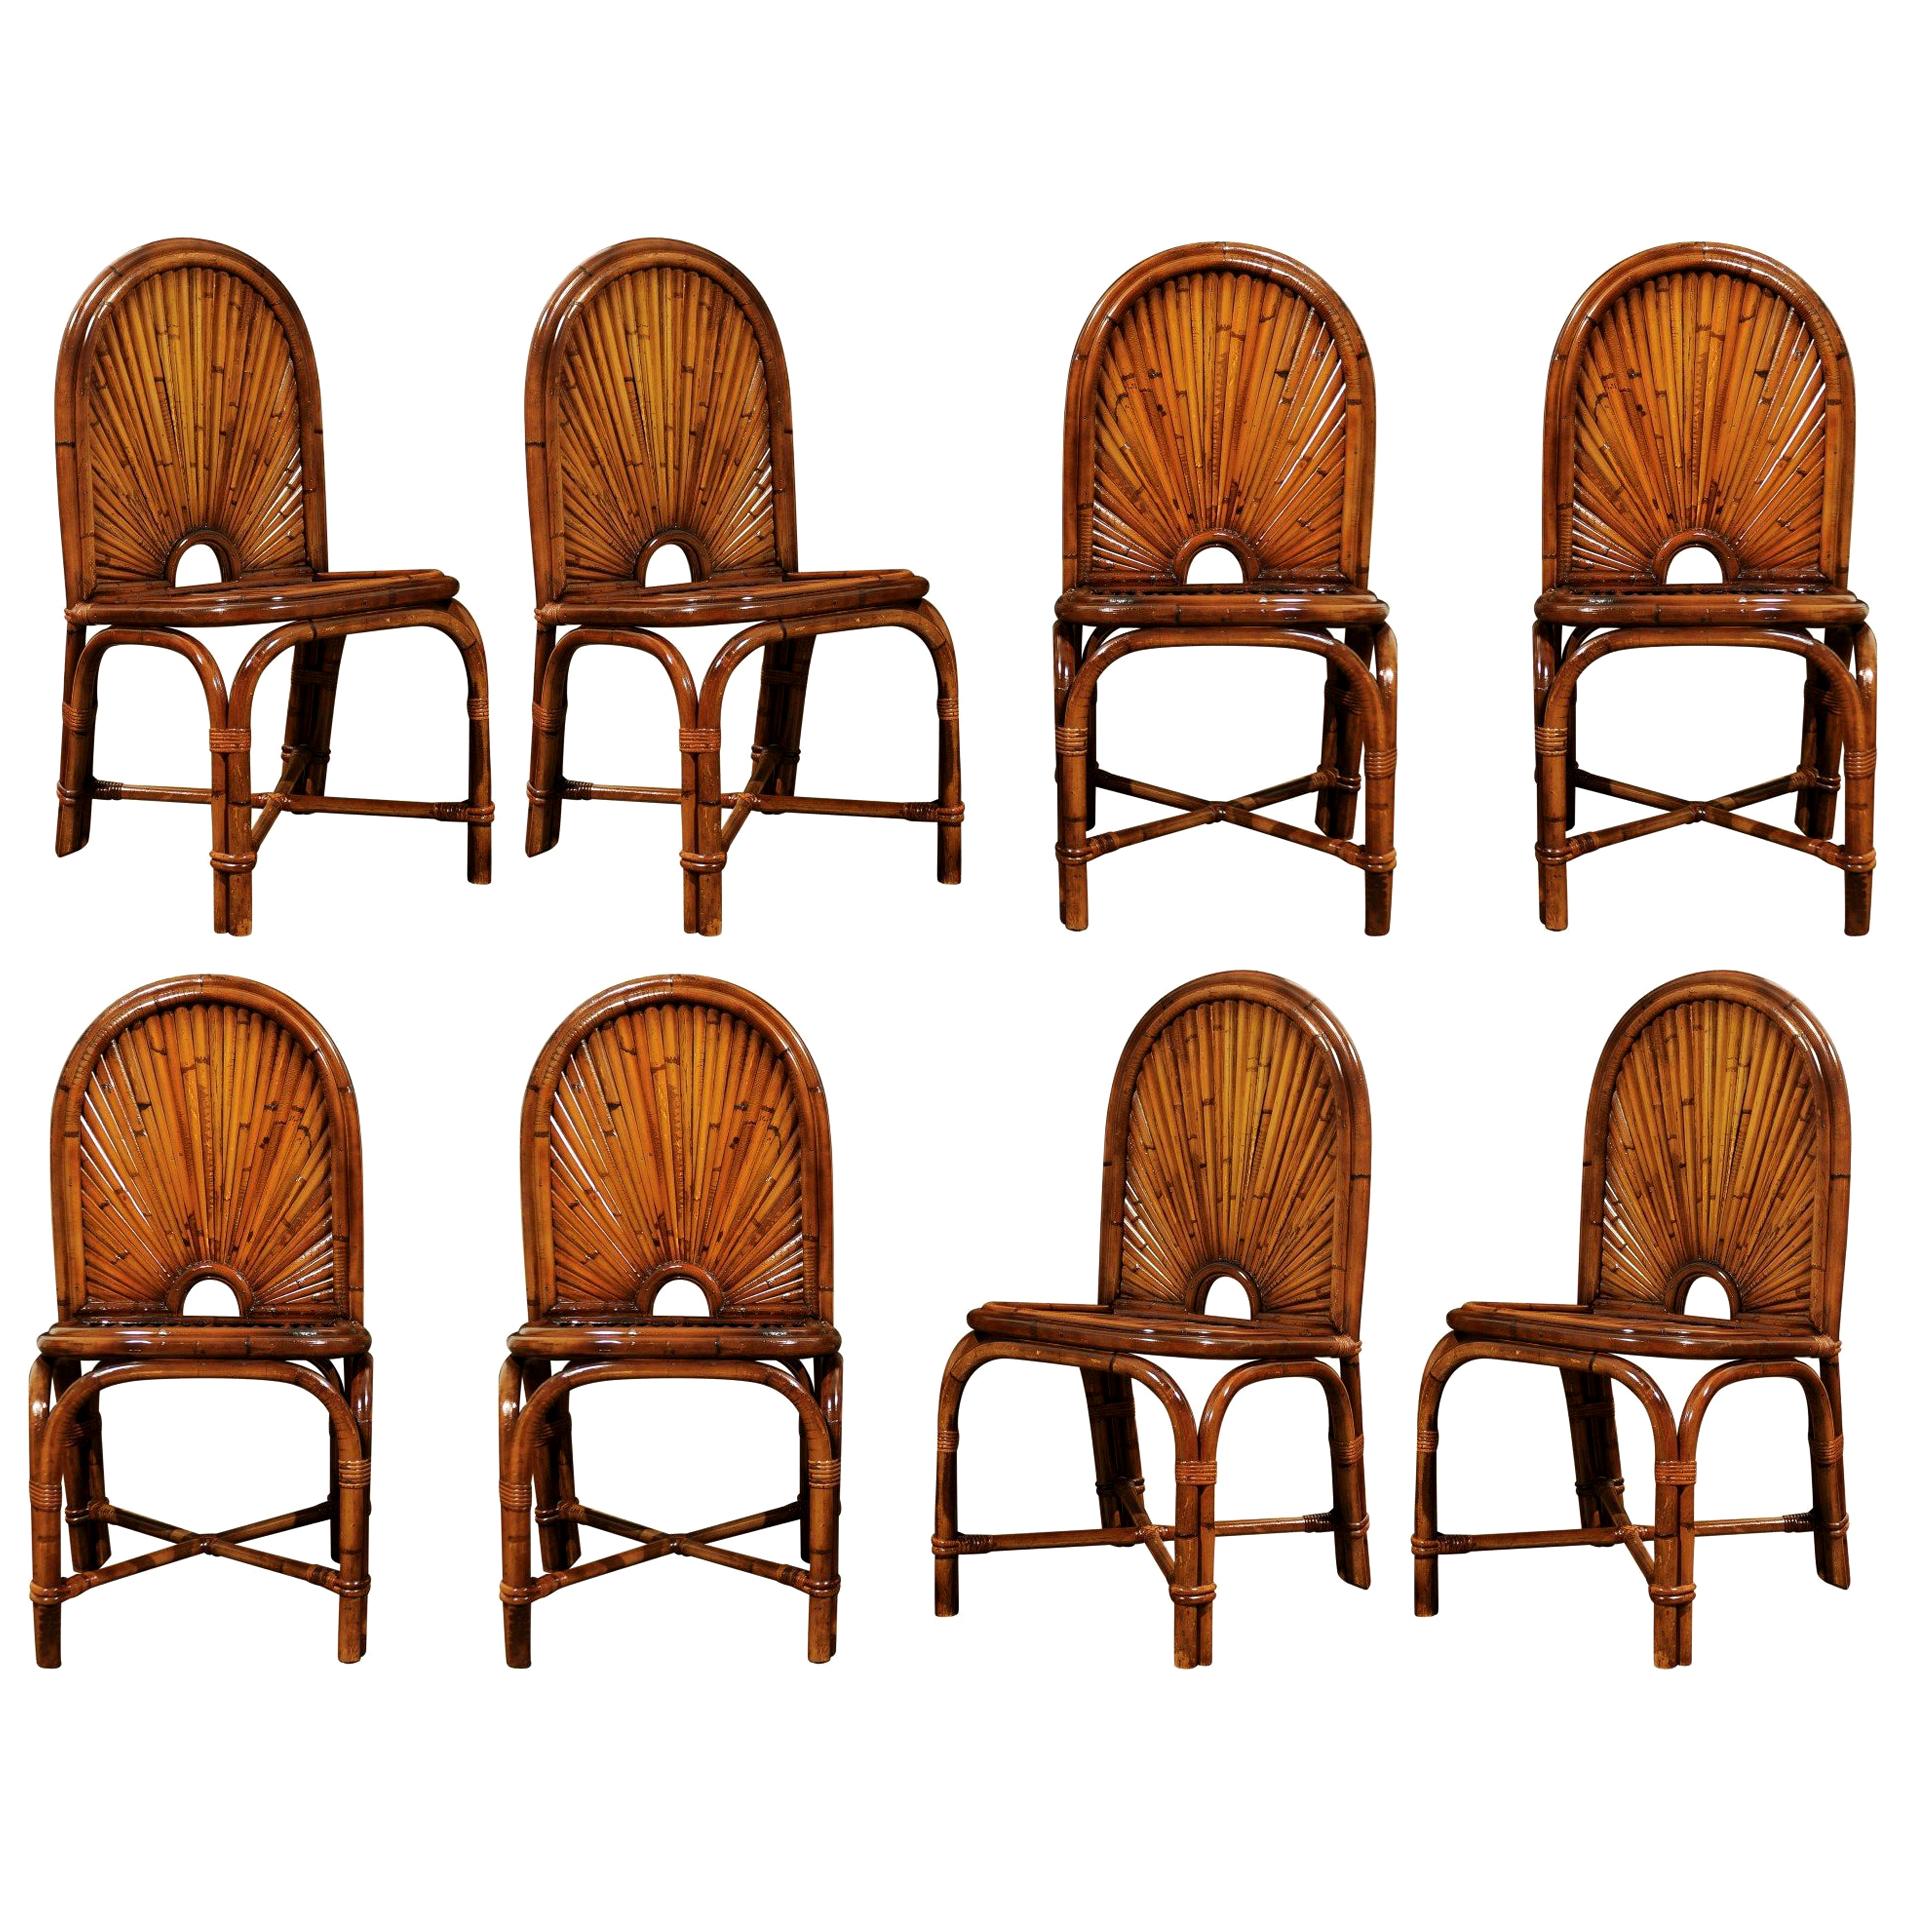 Spectacular Restored Set of 12 Rattan and Bamboo Dining Chairs, circa 1975 For Sale